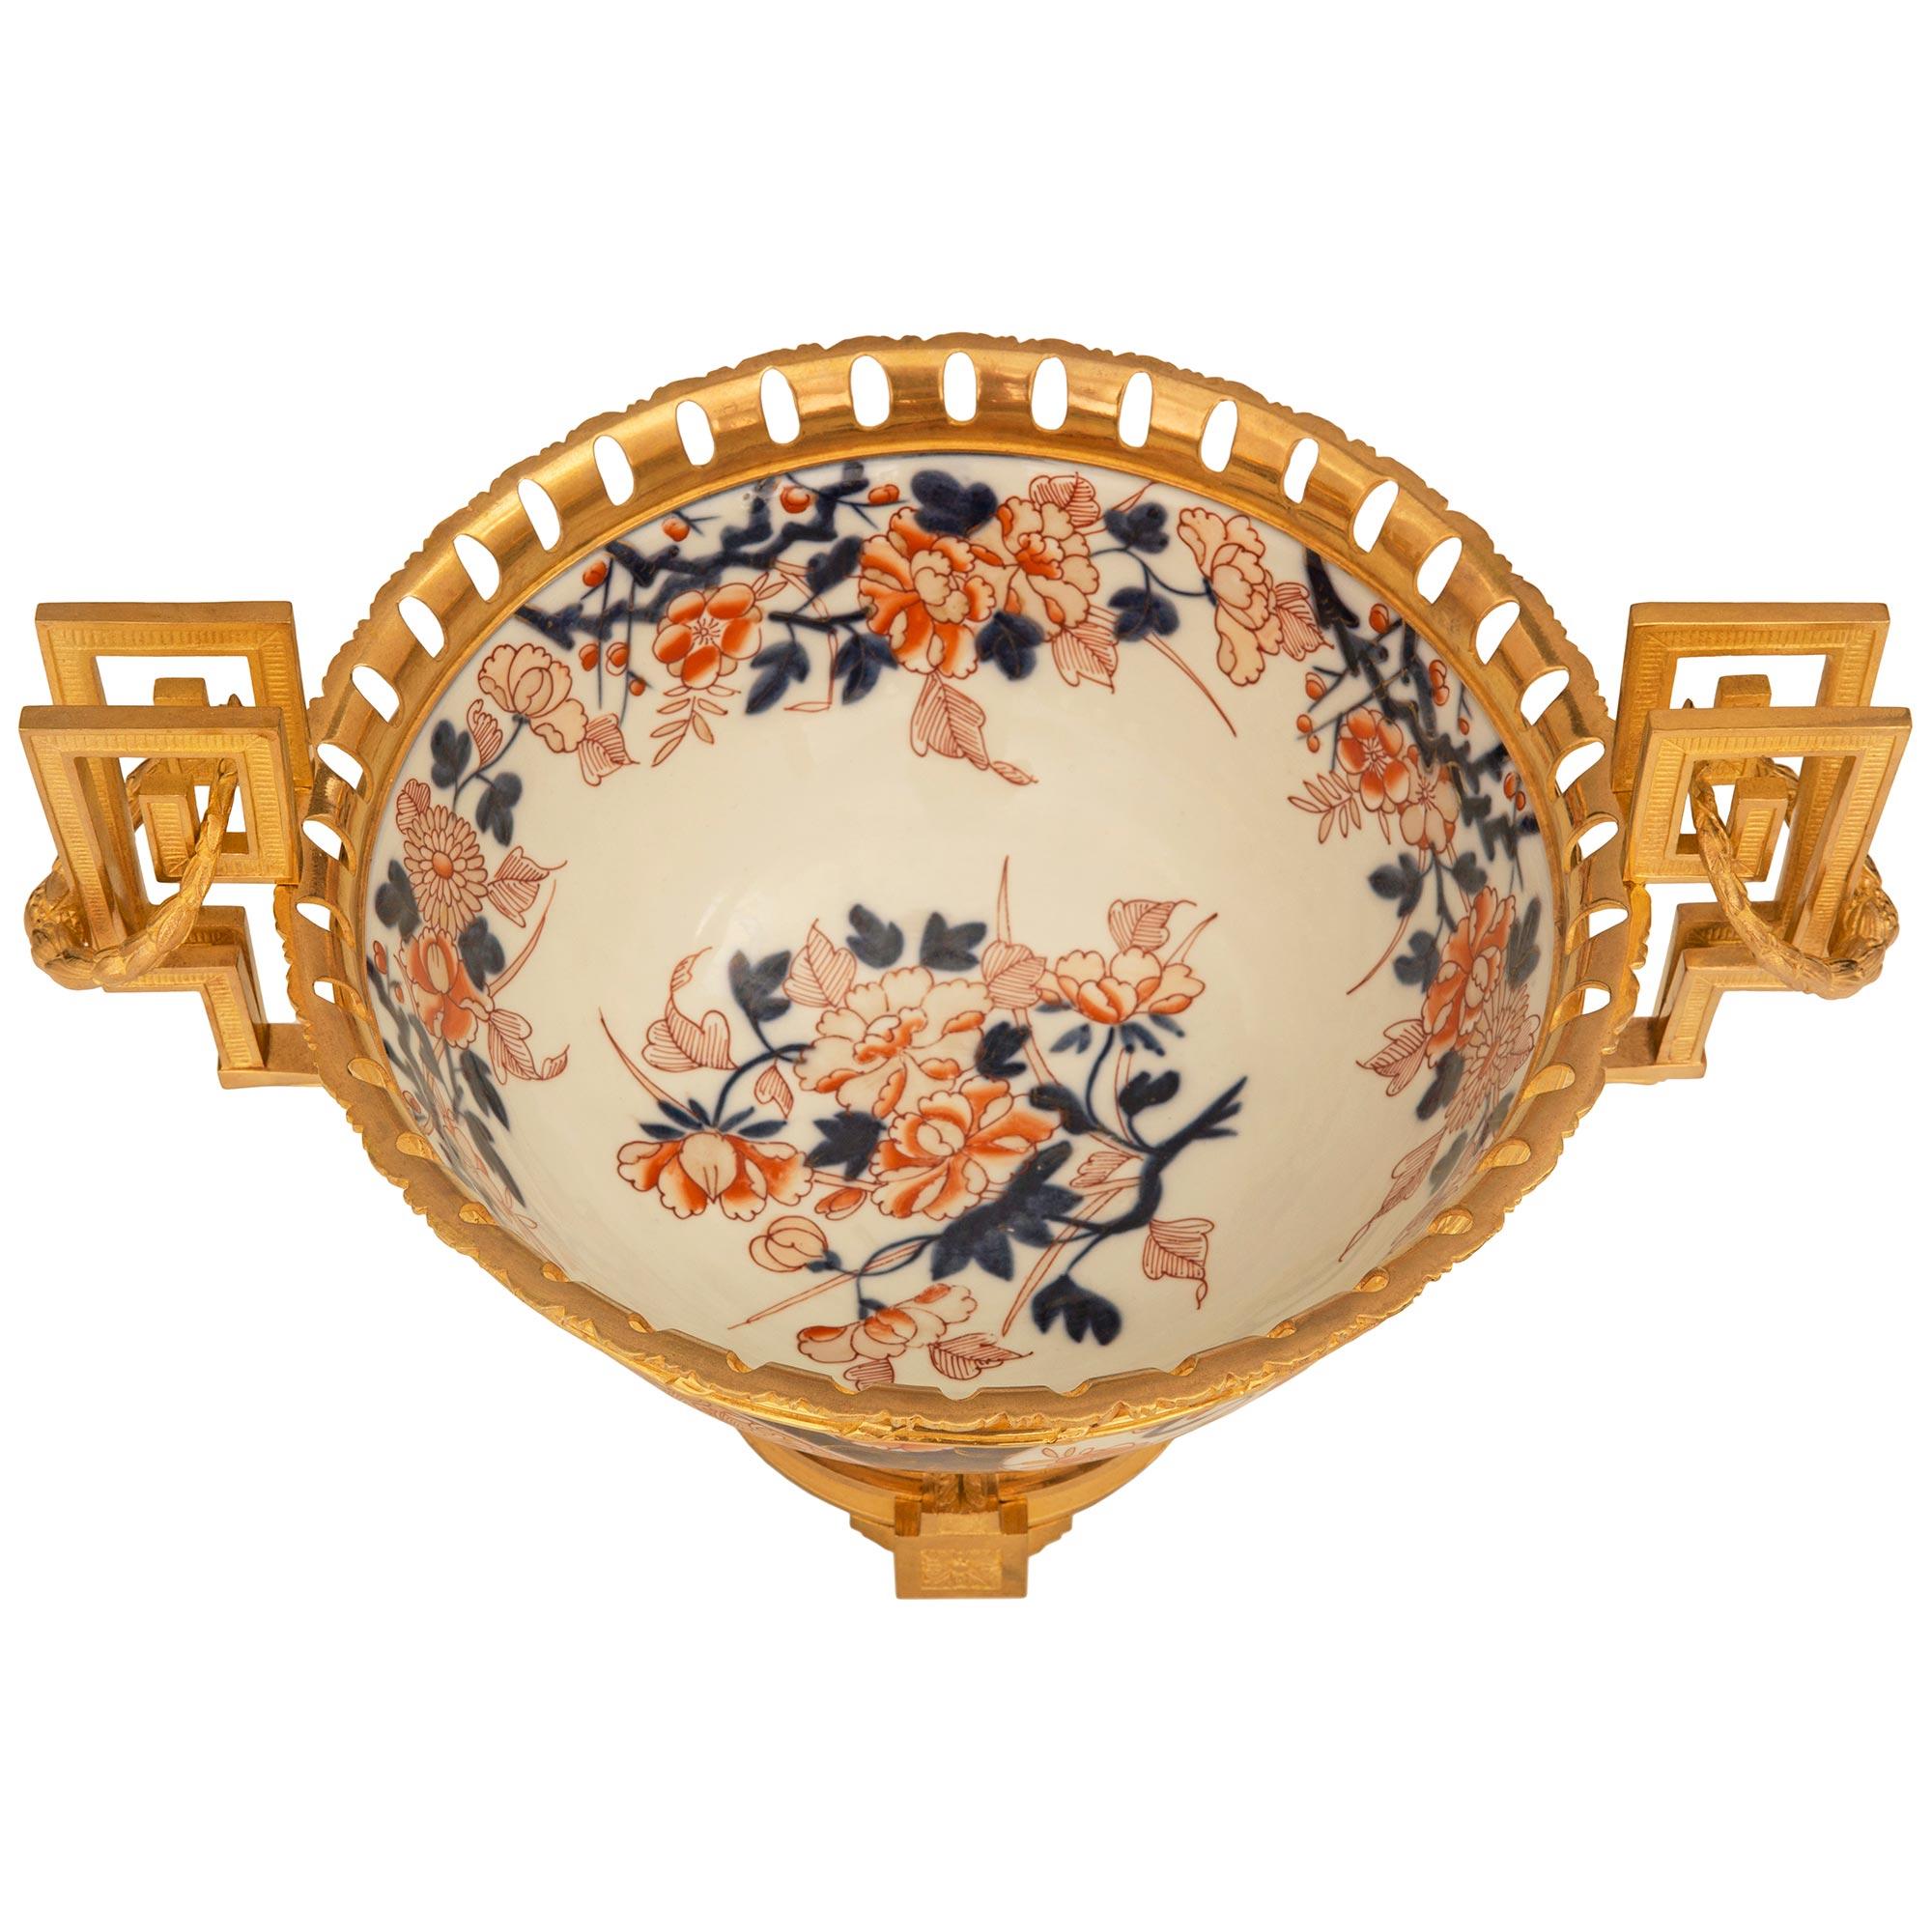 An elegant Japanese 19th century Imari Porcelain and Ormolu centerpiece. The centerpiece is raised on a beautiful French Louis XVI st. Ormolu base with four block supports and richly chased central rosettes. The concave shape above is decorated with